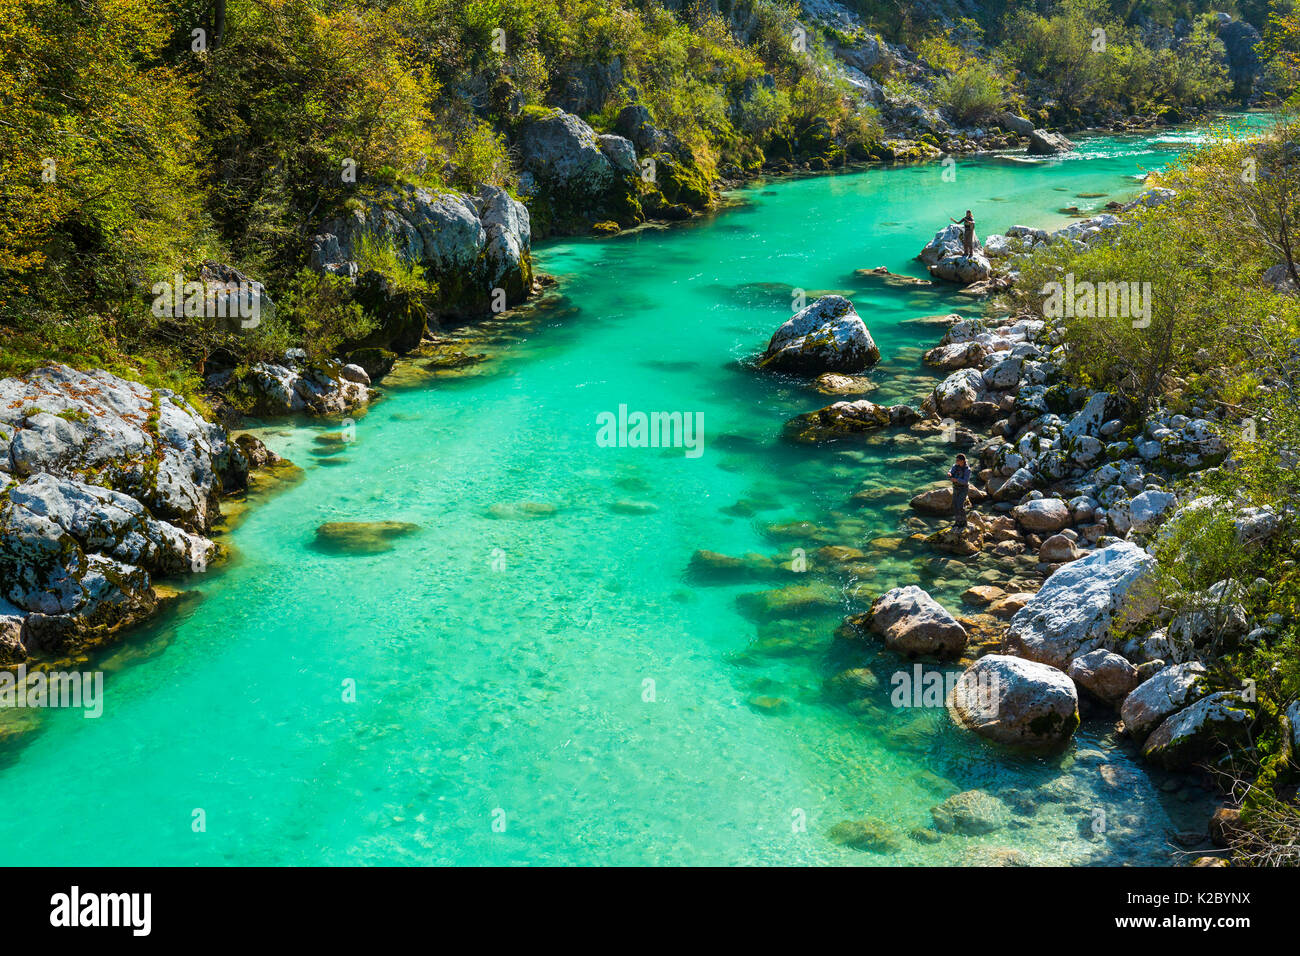 Fisherman fishing in clear blue waters of the Soca river, Soca Valley, Julian Alps, Slovenia, October 2014. Stock Photo